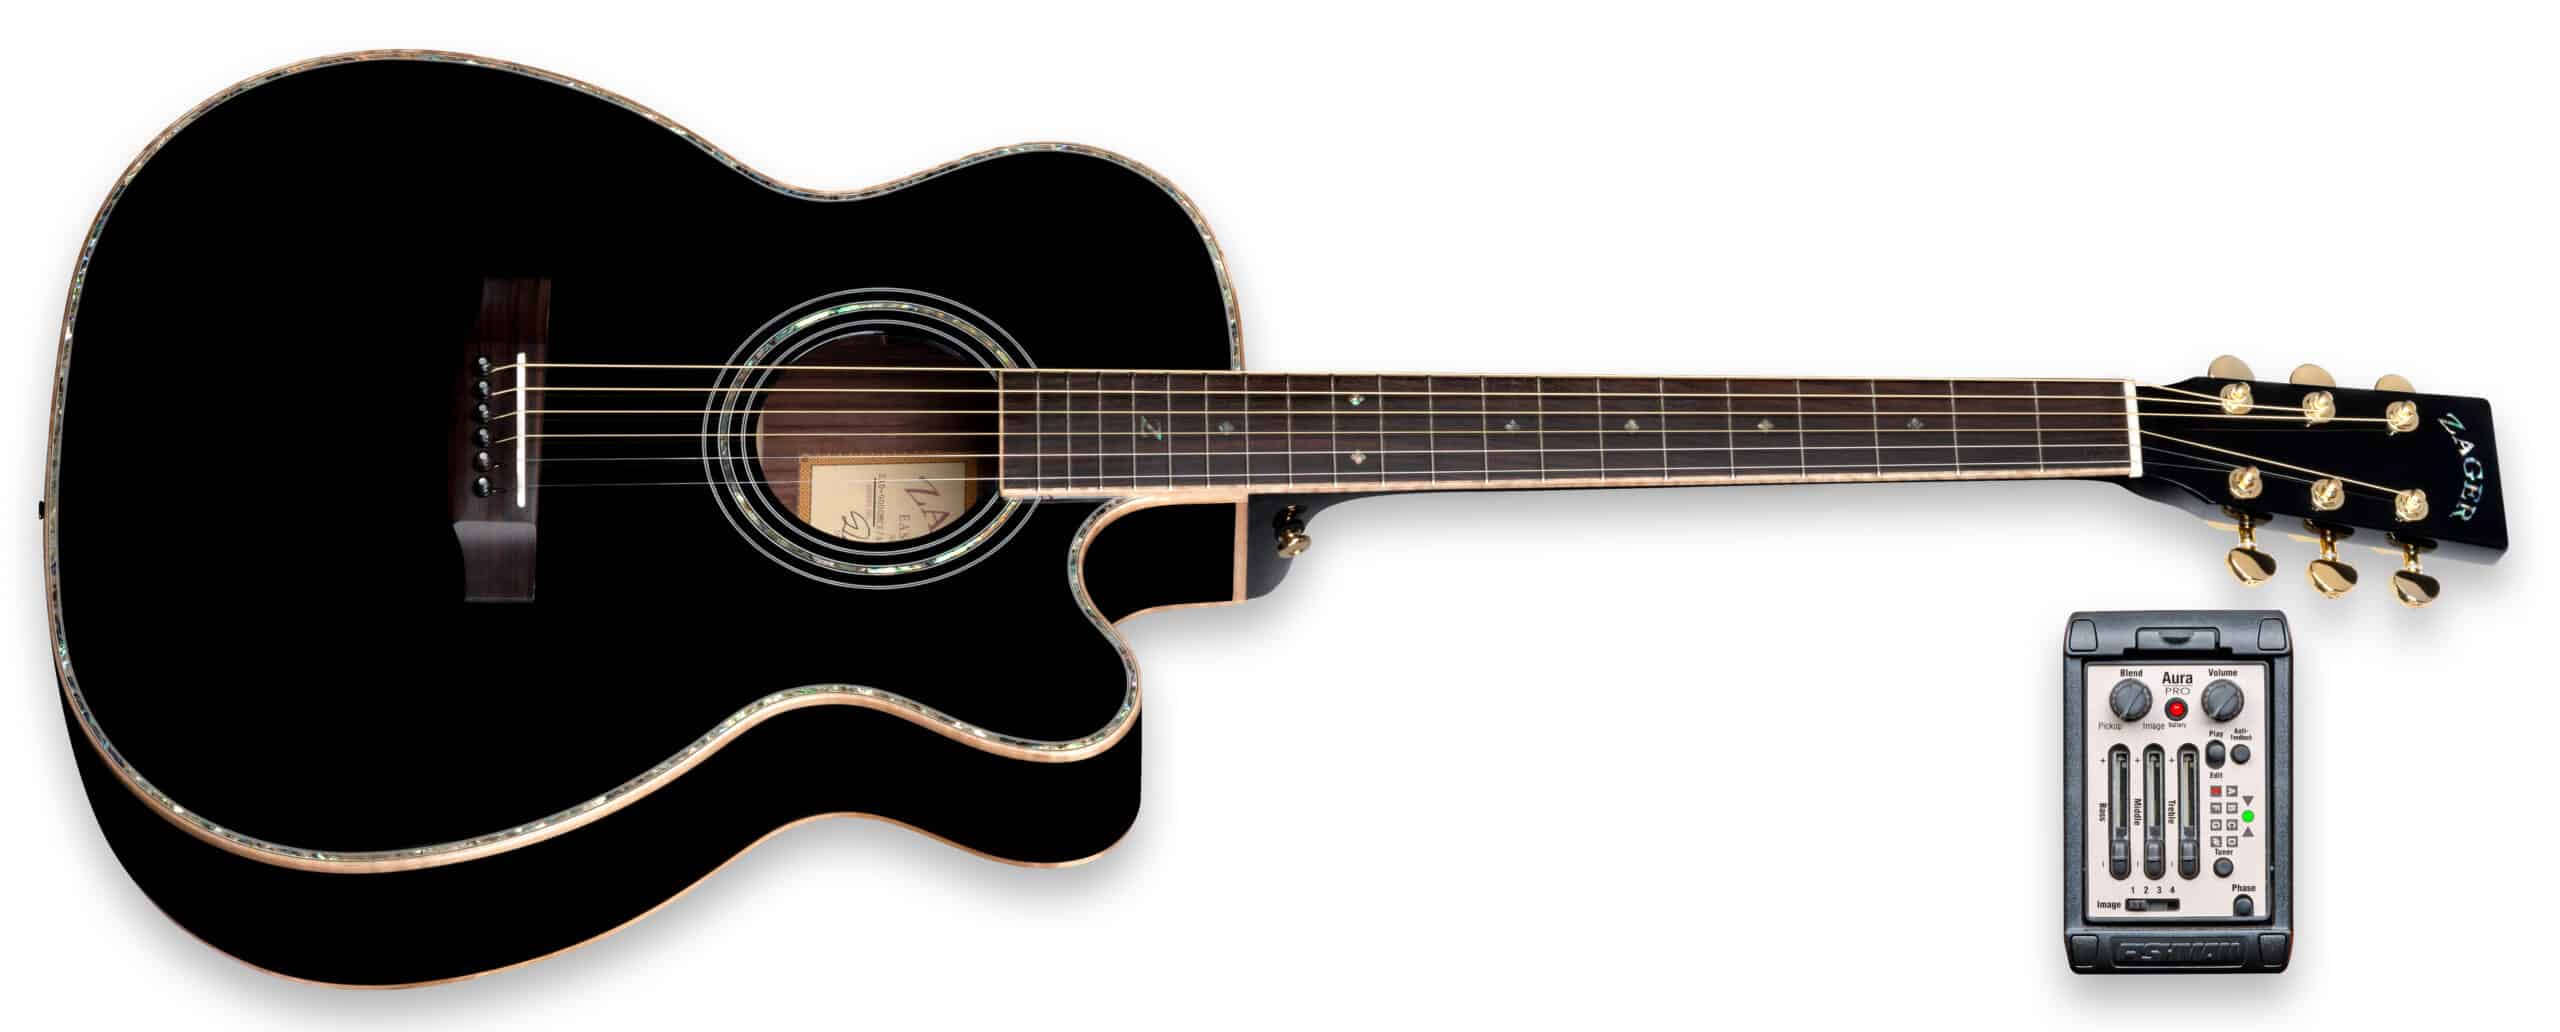 ZAD900CE Solid Spruce/Rosewood Acoustic Electric AURA Smaller "OM" Size Limited Edition Black Lacquer Deal of the Day